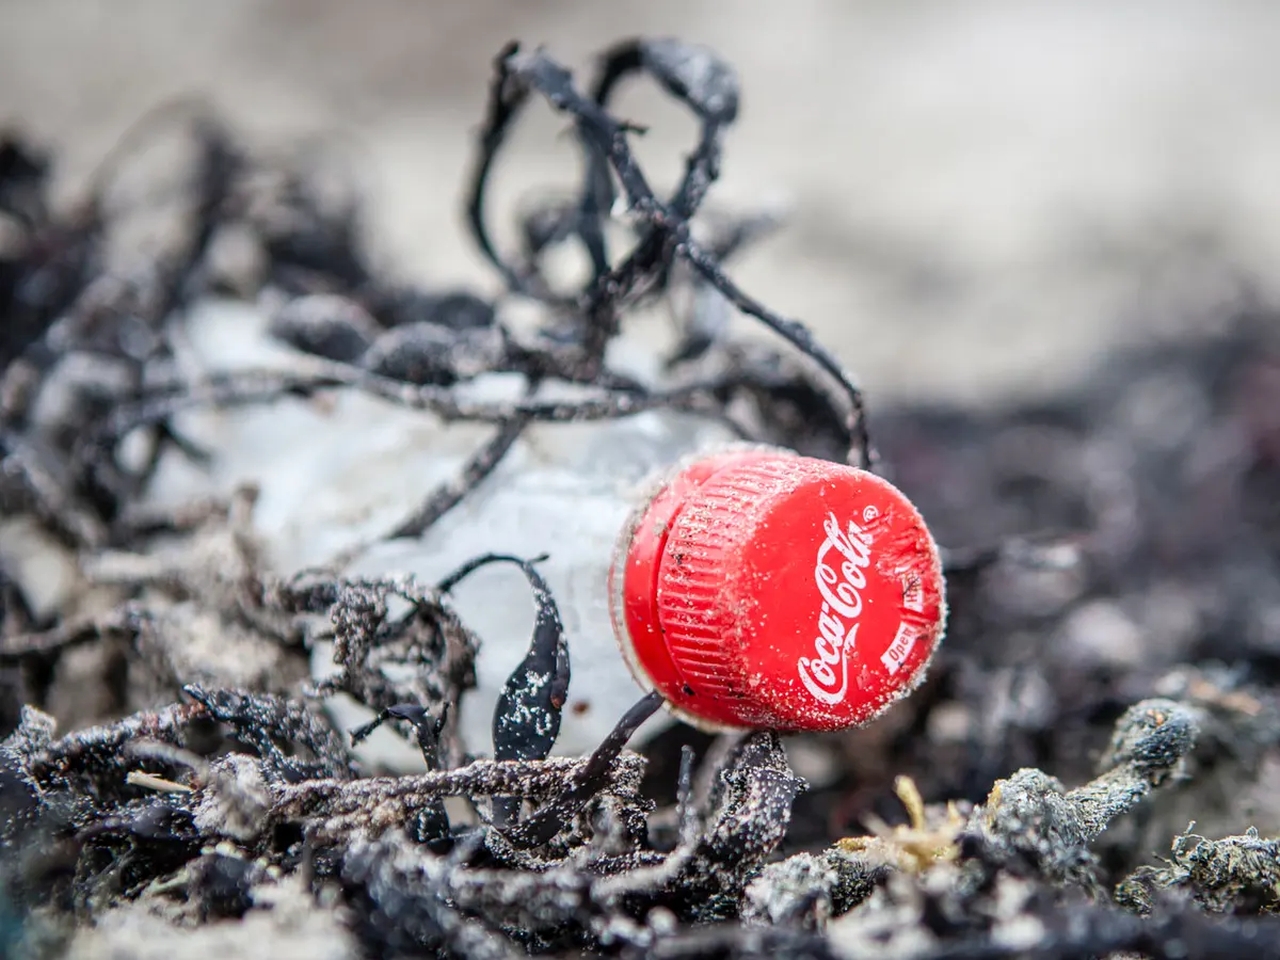 Coca-Cola is World’s Worst Plastic Polluter for Fifth Consecutive Year